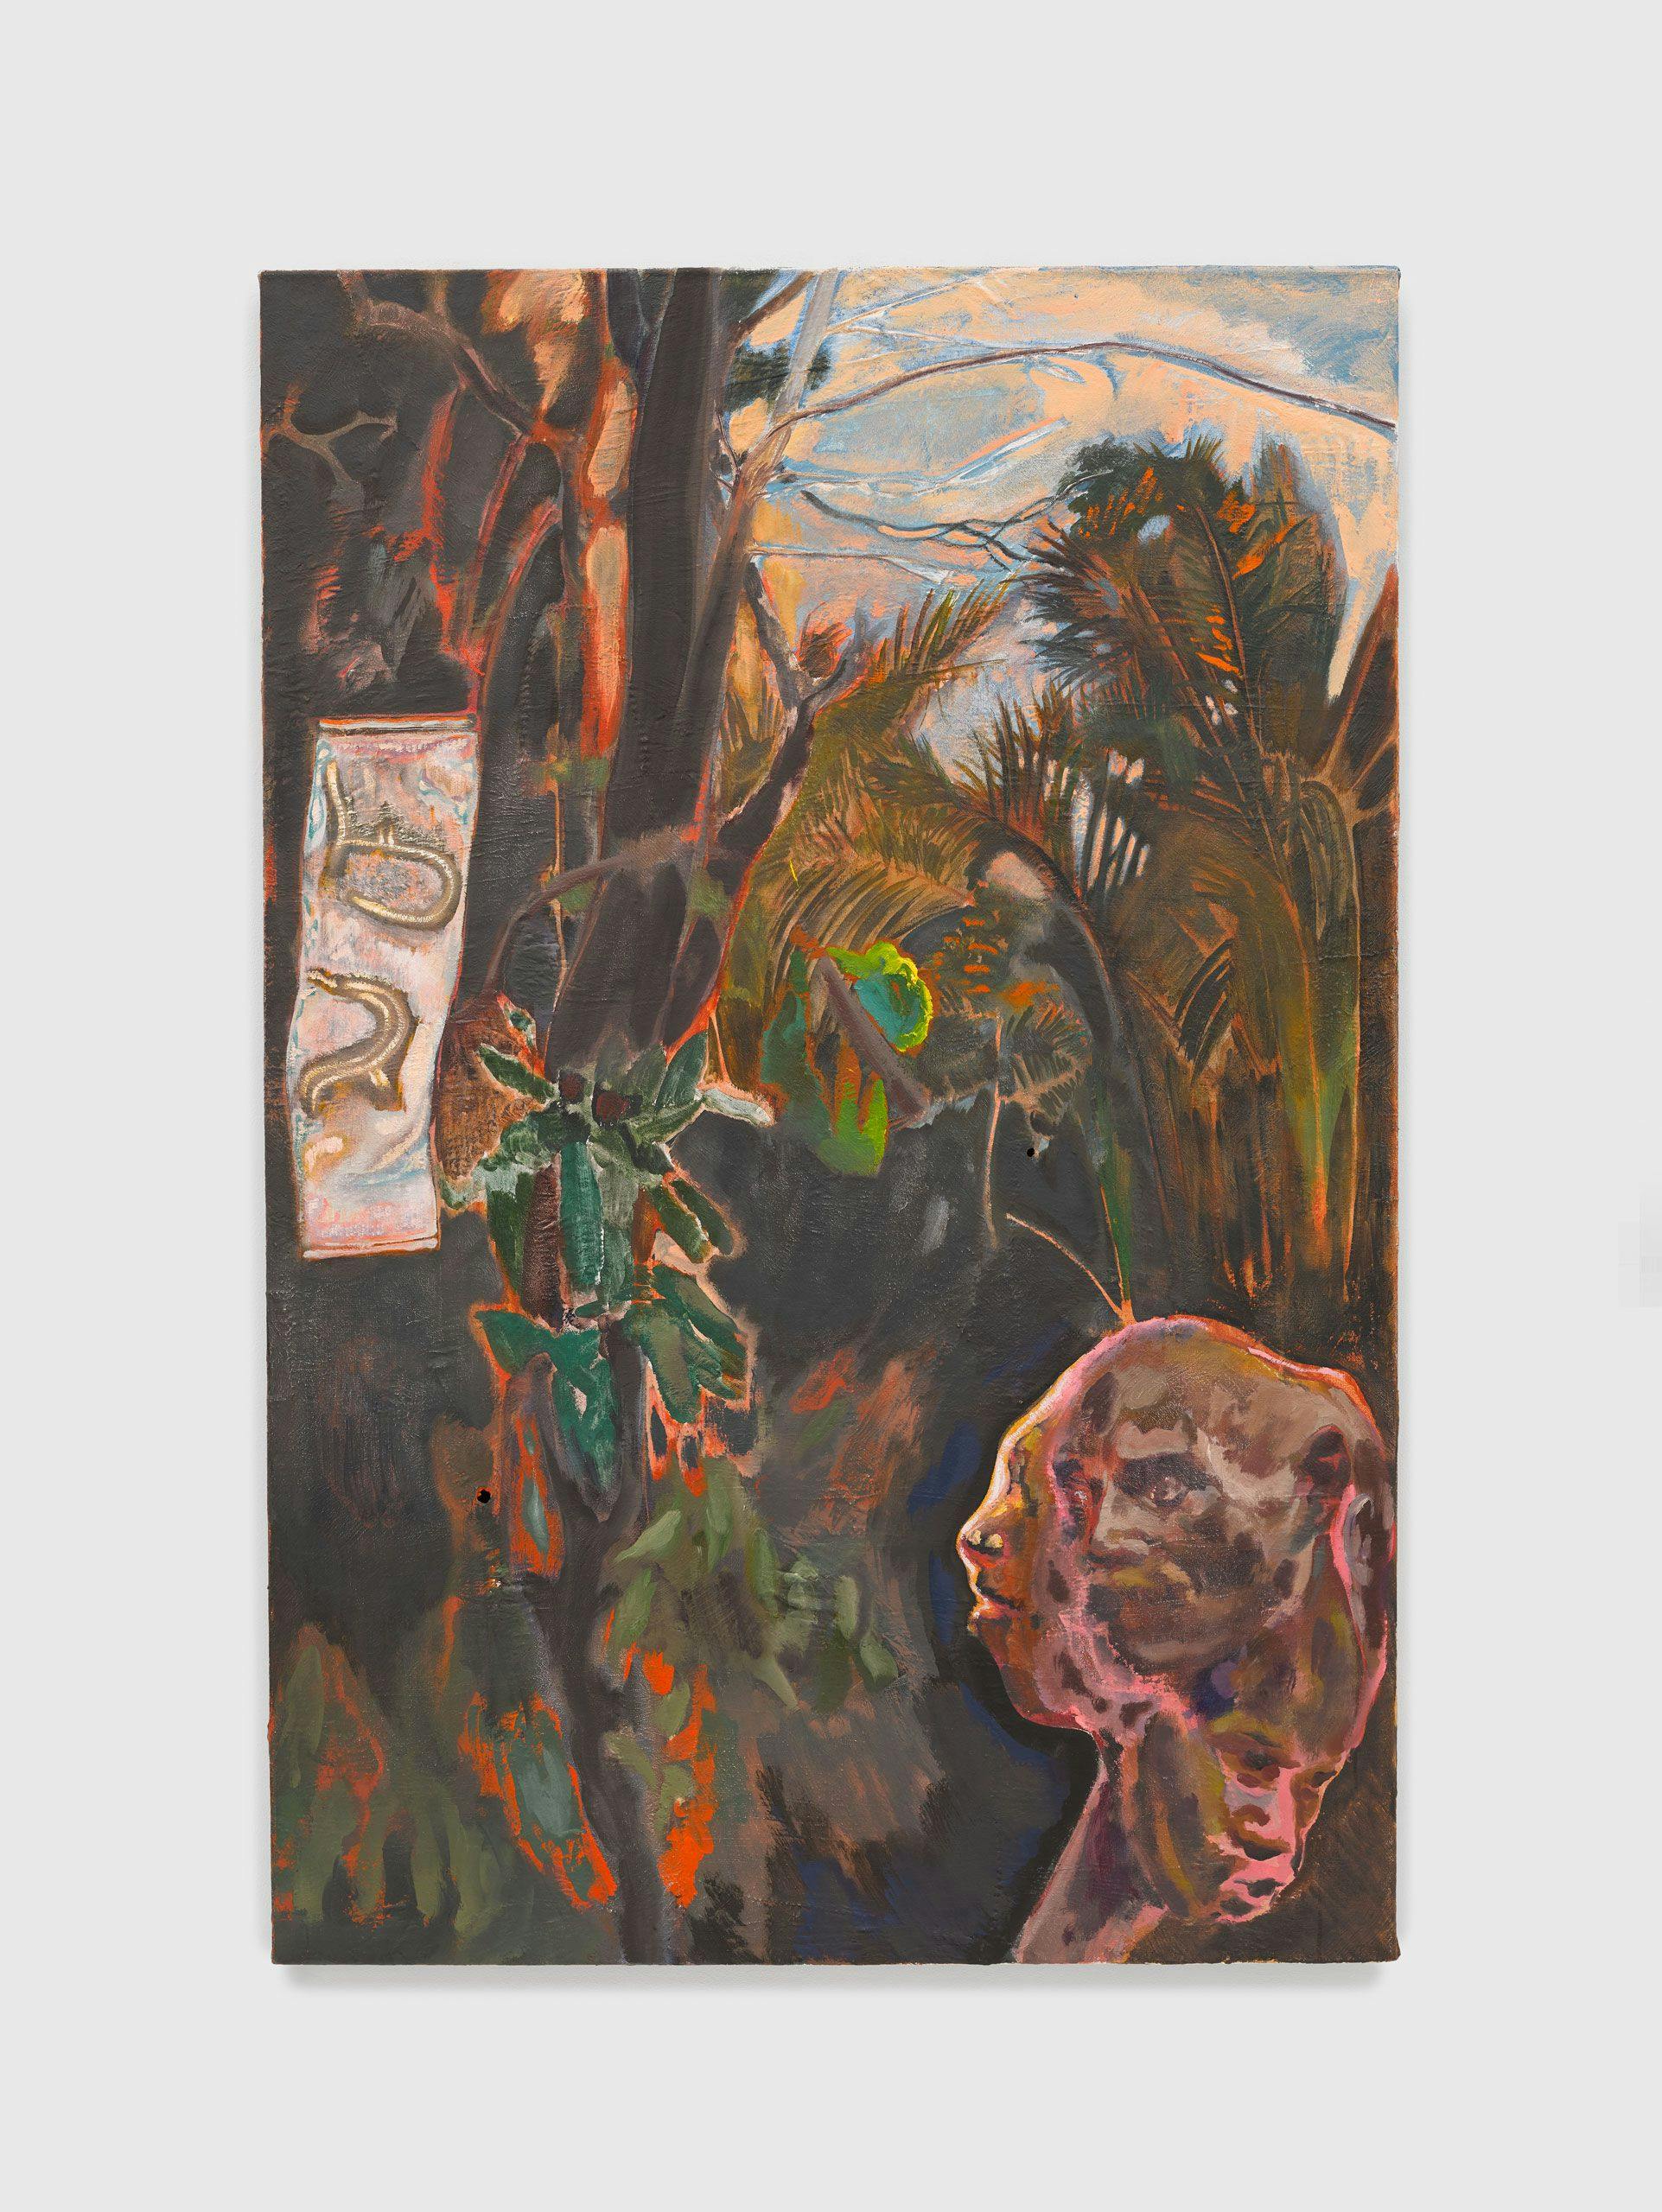 A painting by Michael Armitage, titled Account of an Illiterate Man, dated 2020.